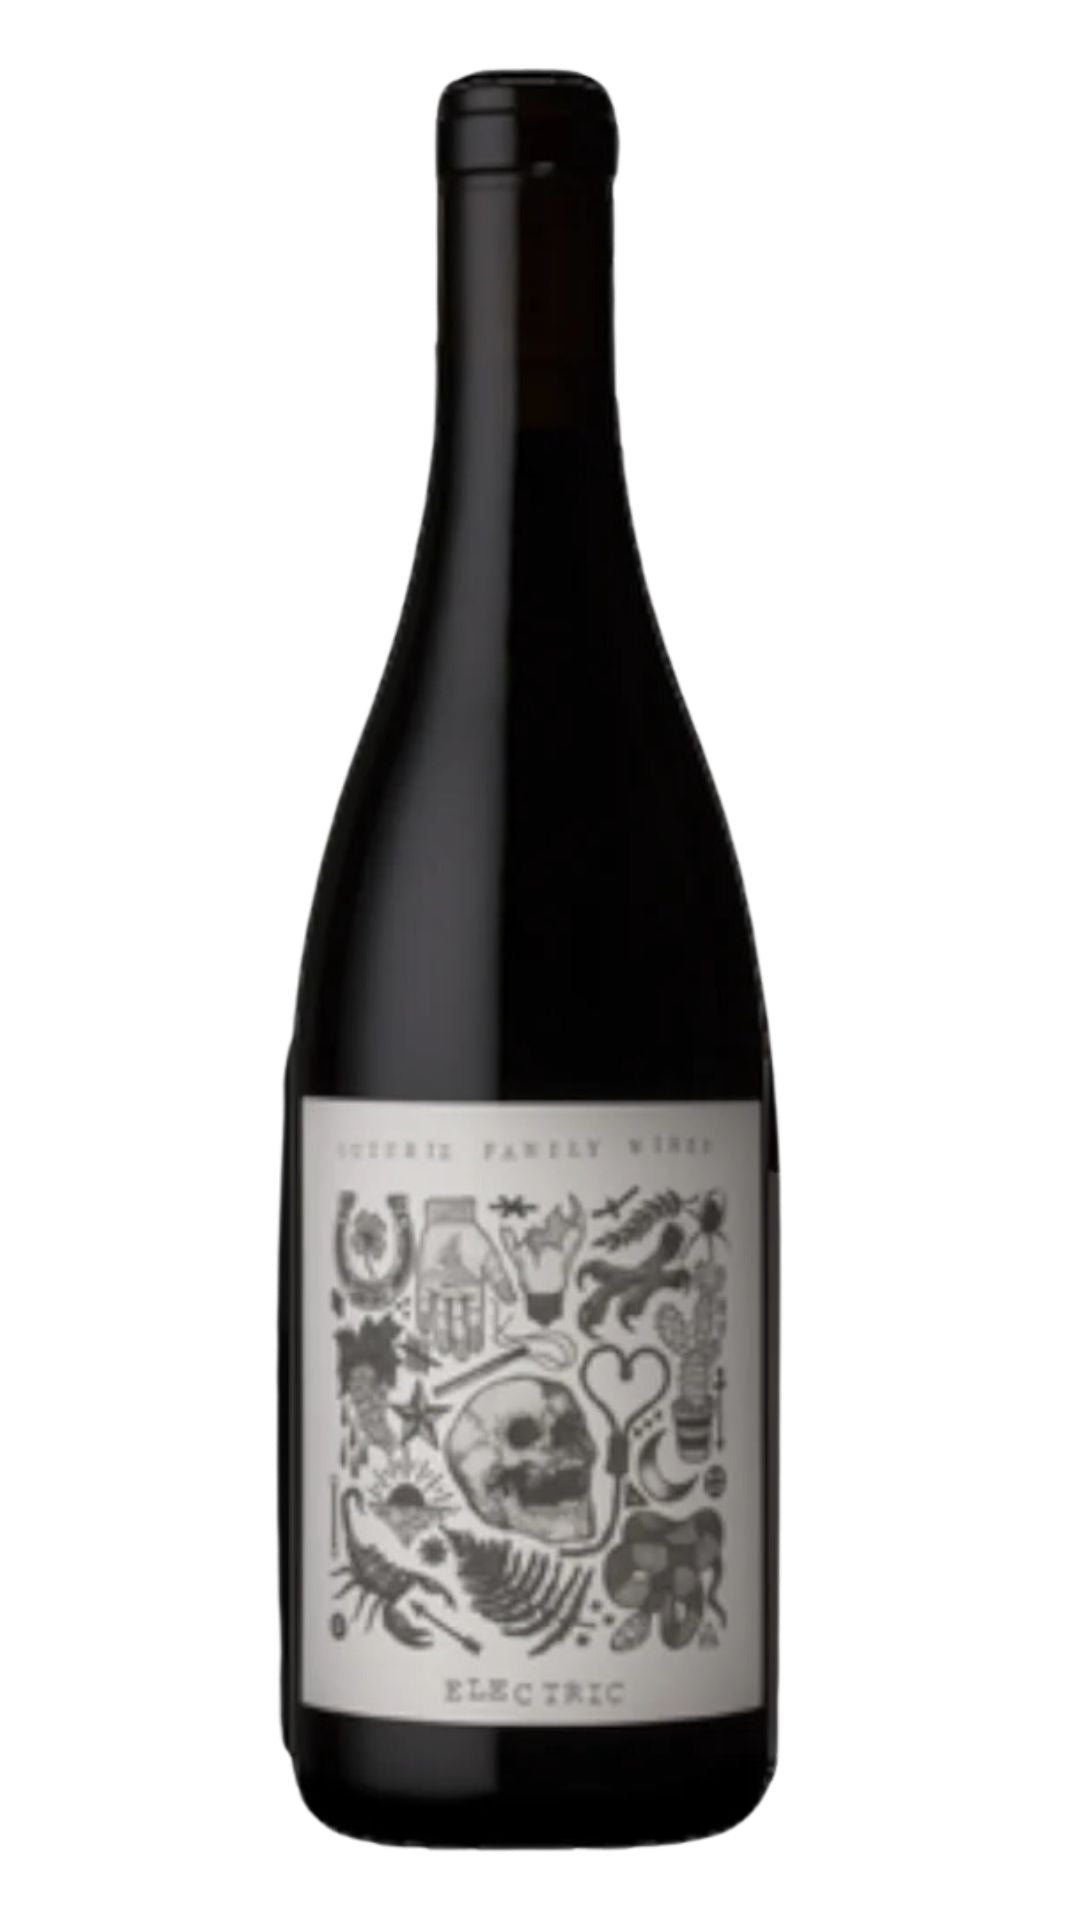 2019 Guthrie Family Wines Electric Syrah - Harvest Wine Shop